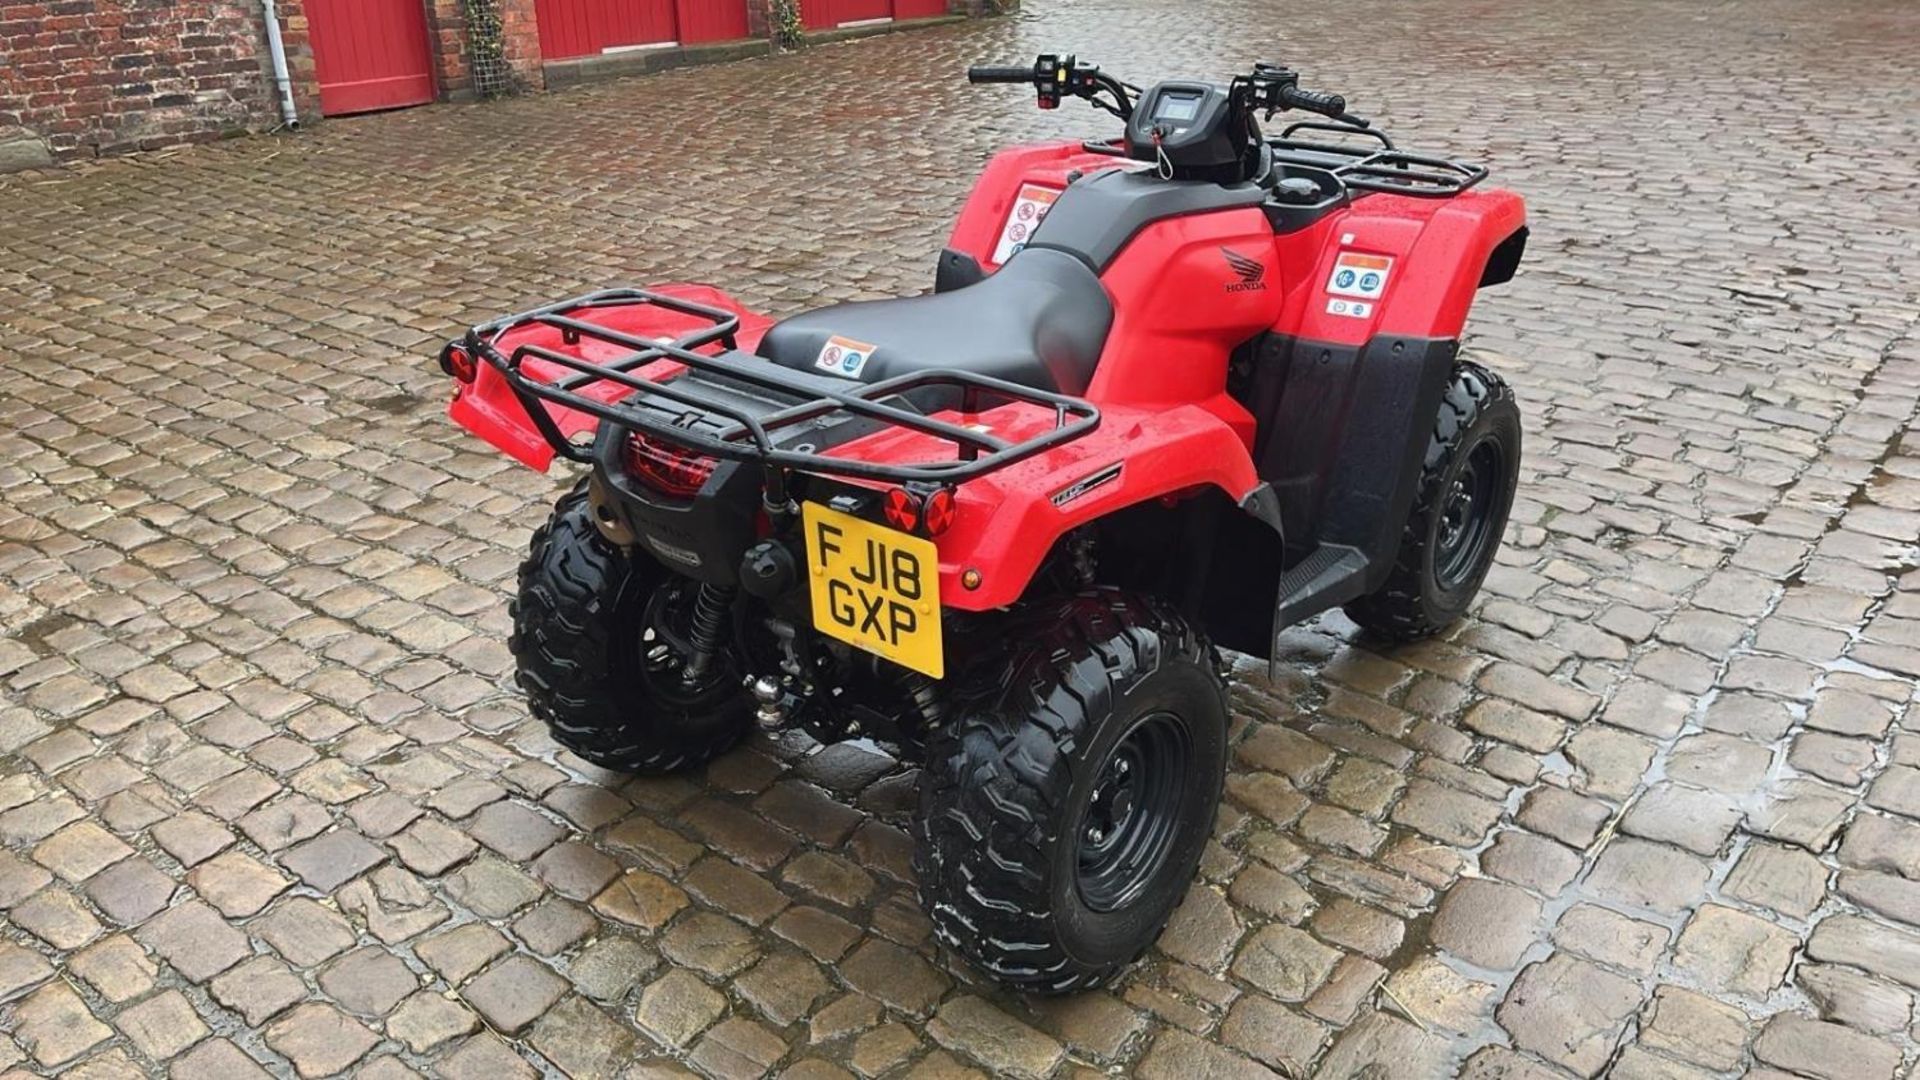 2018 HONDA TRX420FA6 FOURTRAX RANCHER AUTOMATIC DCT QUAD BIKE CAN BE SWITCED FROM 2 TO 4 WHEEL DRIVE - Image 5 of 21